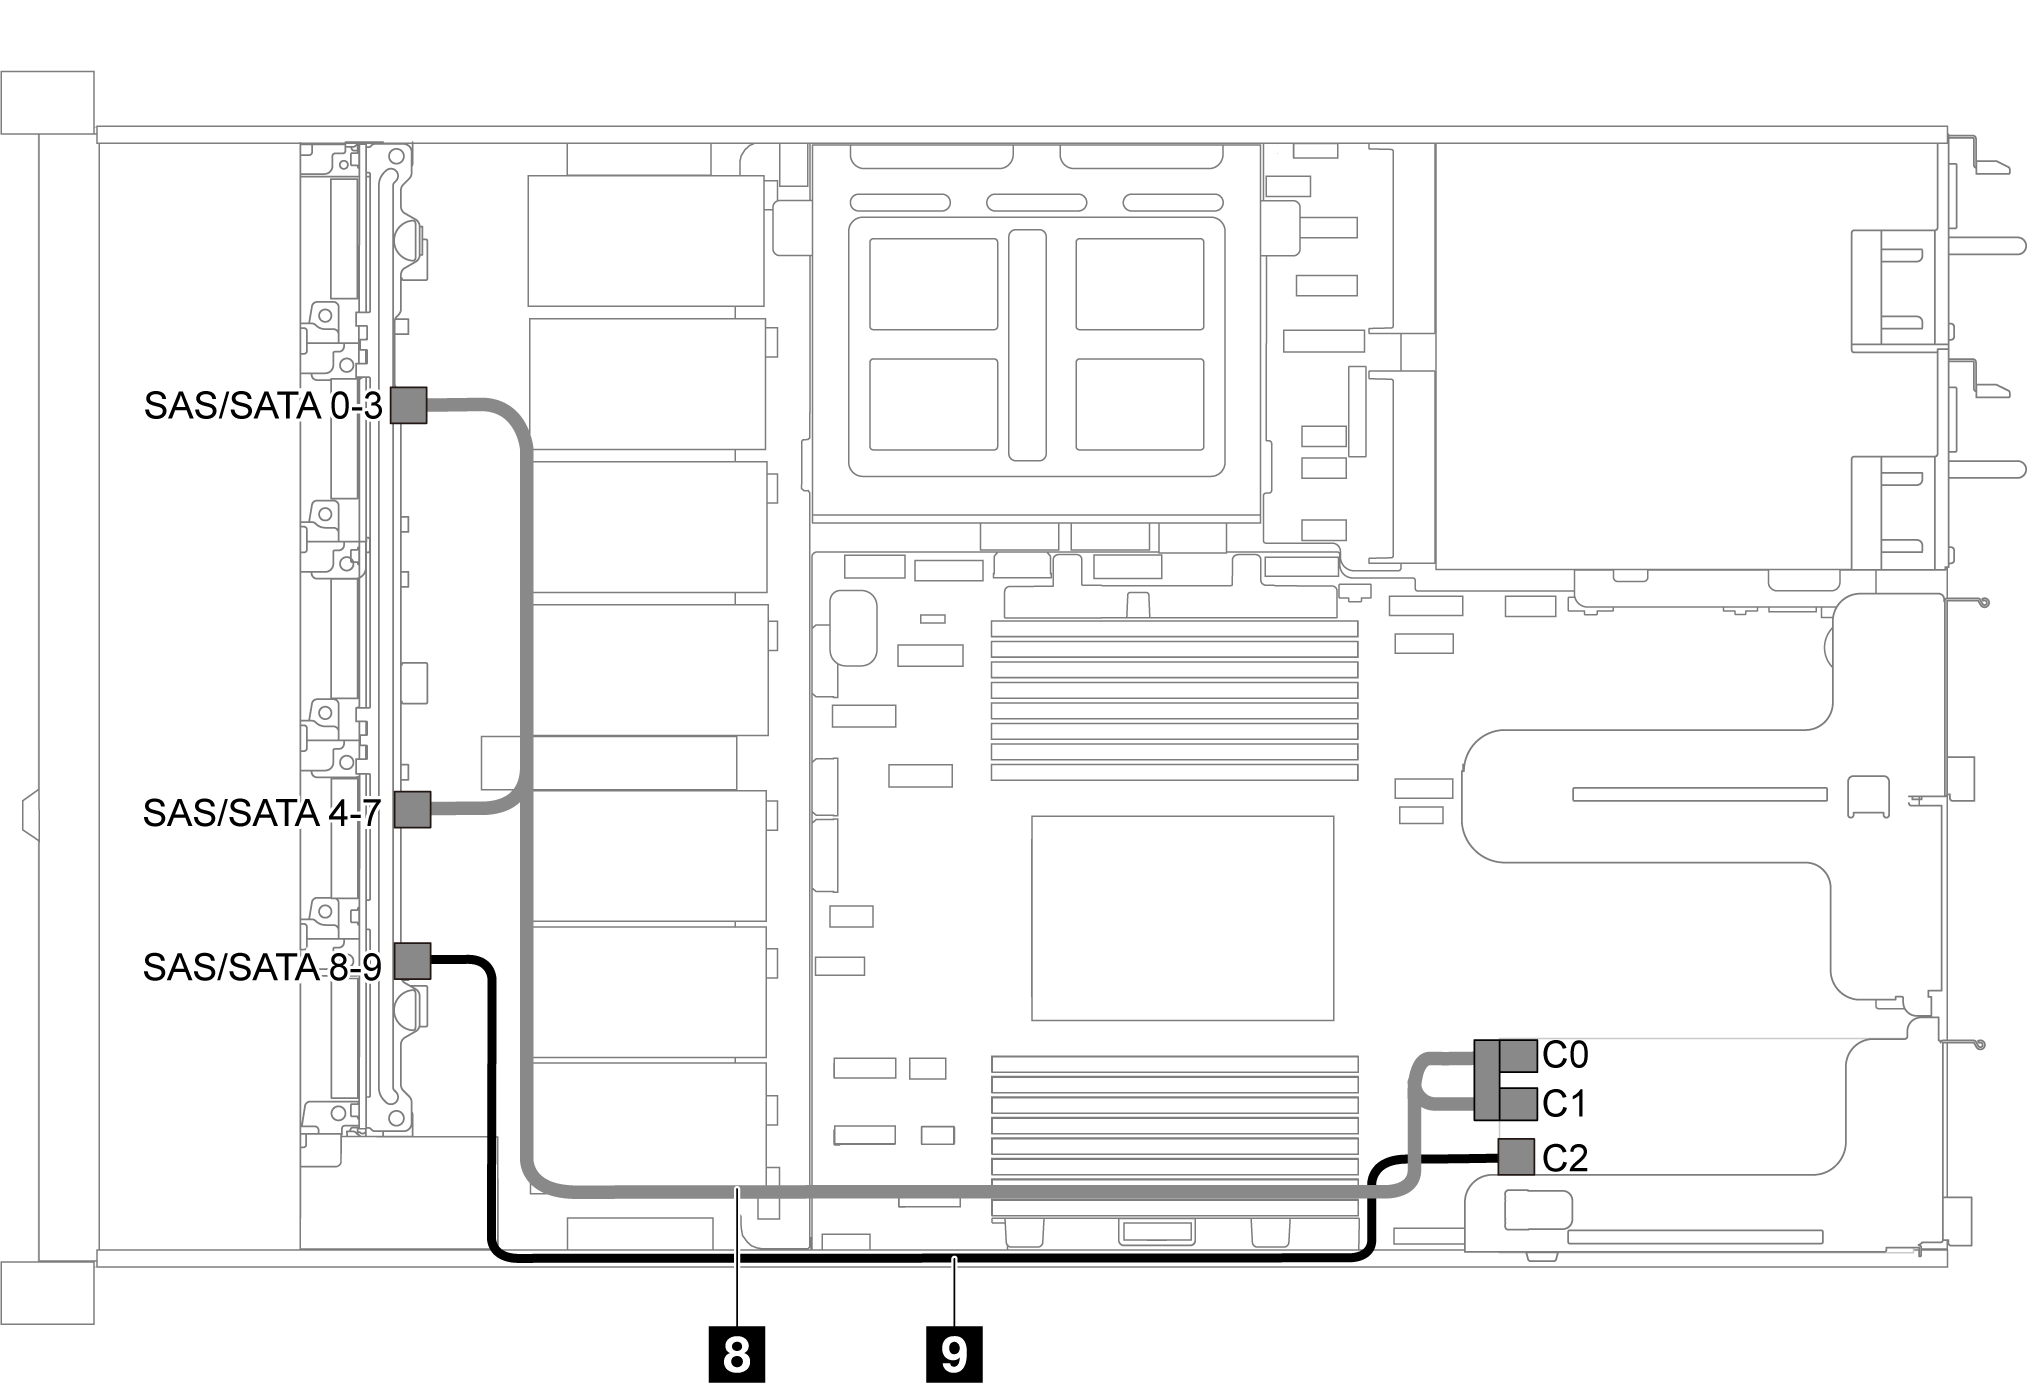 Cable routing for server model with ten 2.5-inch SAS/SATA/NVMe drives, middle NVMe drive assembly and one 16i RAID/HBA adapter